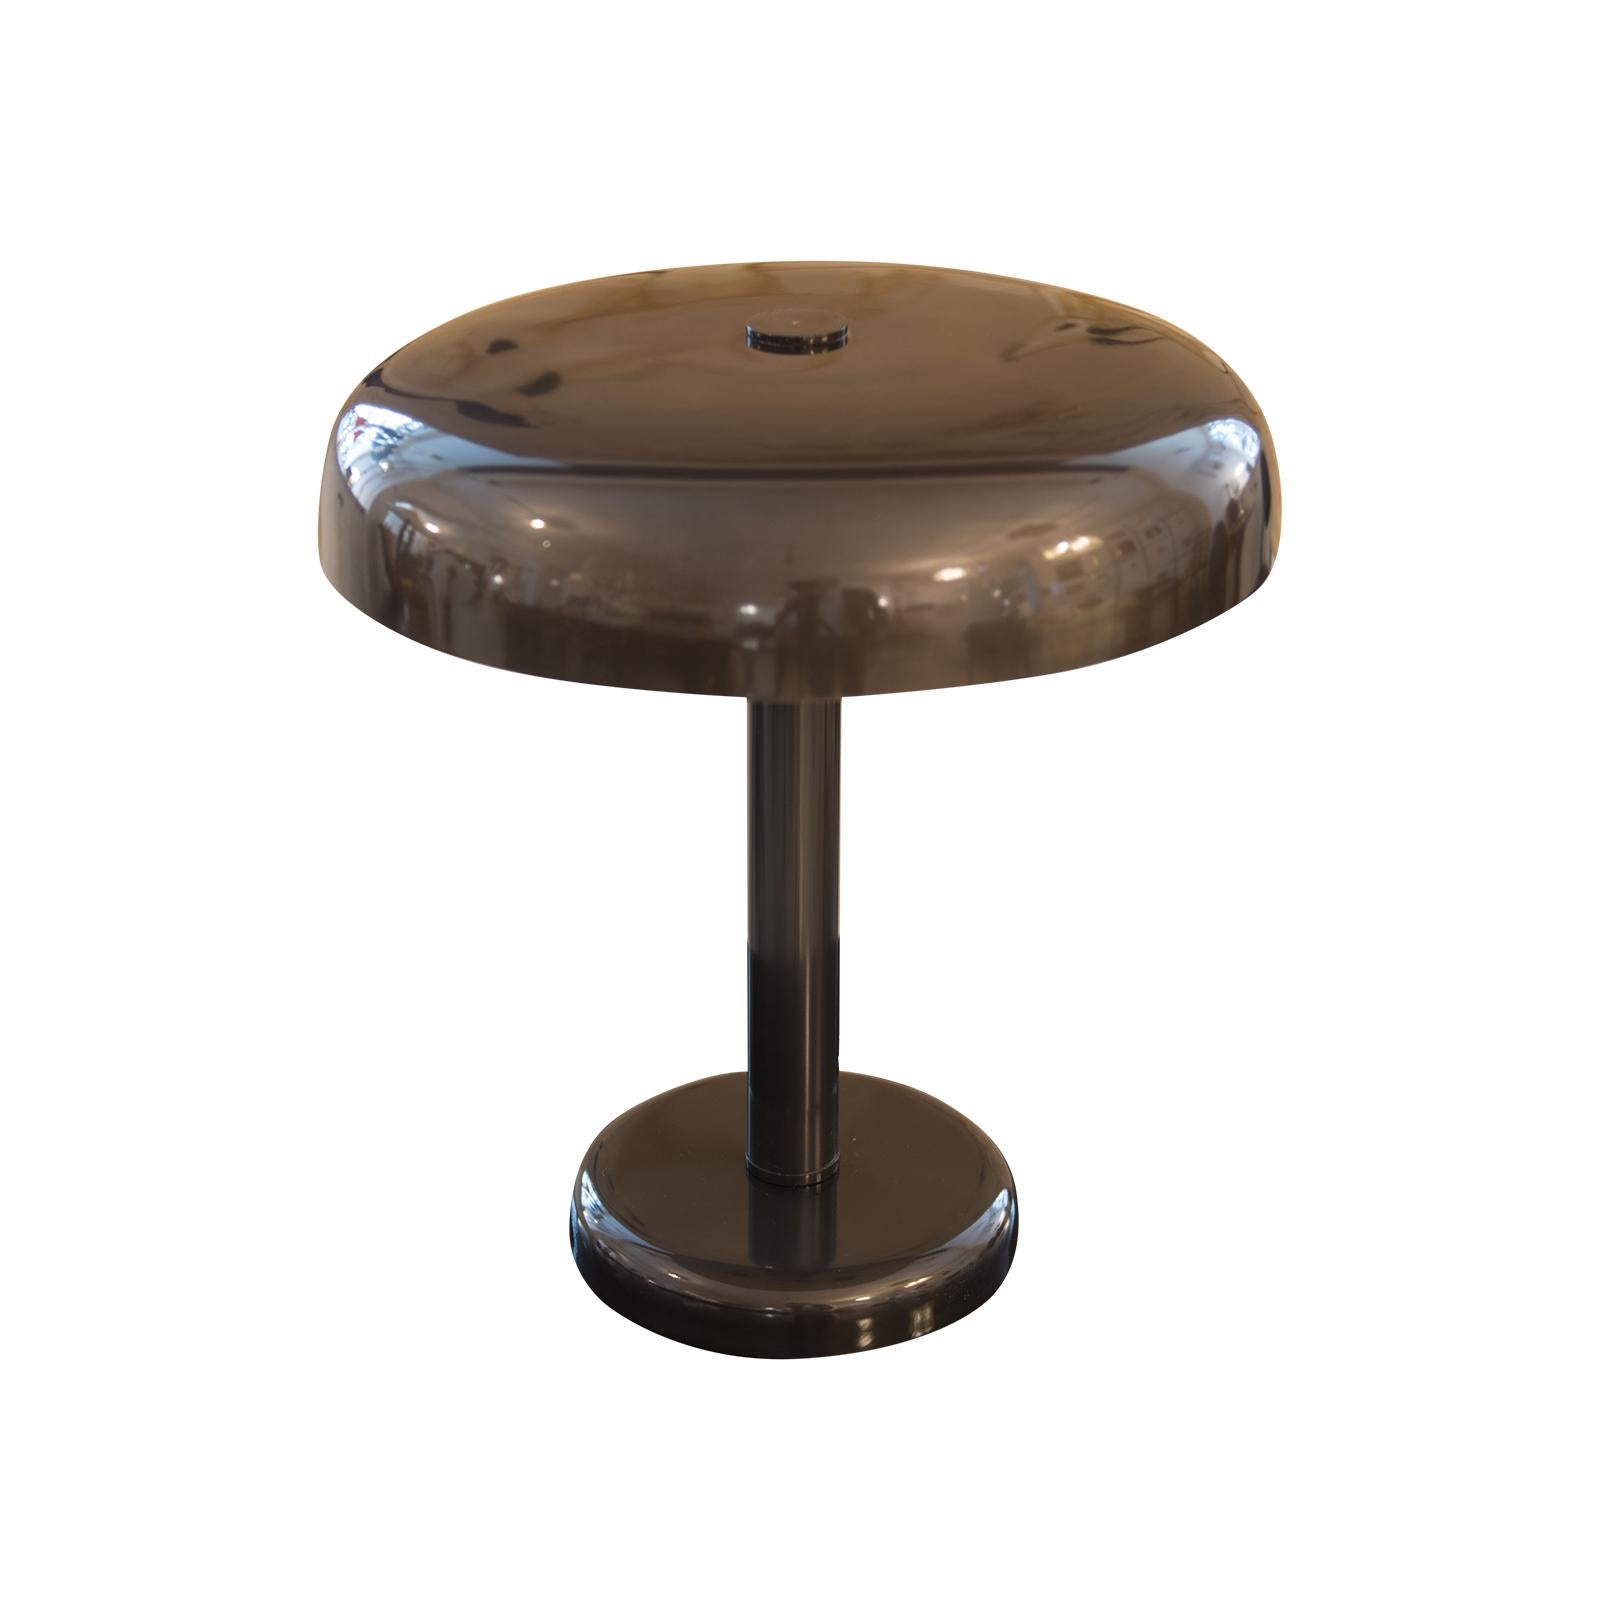 Varnished Clear and Modern Art Deco Style Bauhaus Brass Table Lamp, Re-Edition For Sale